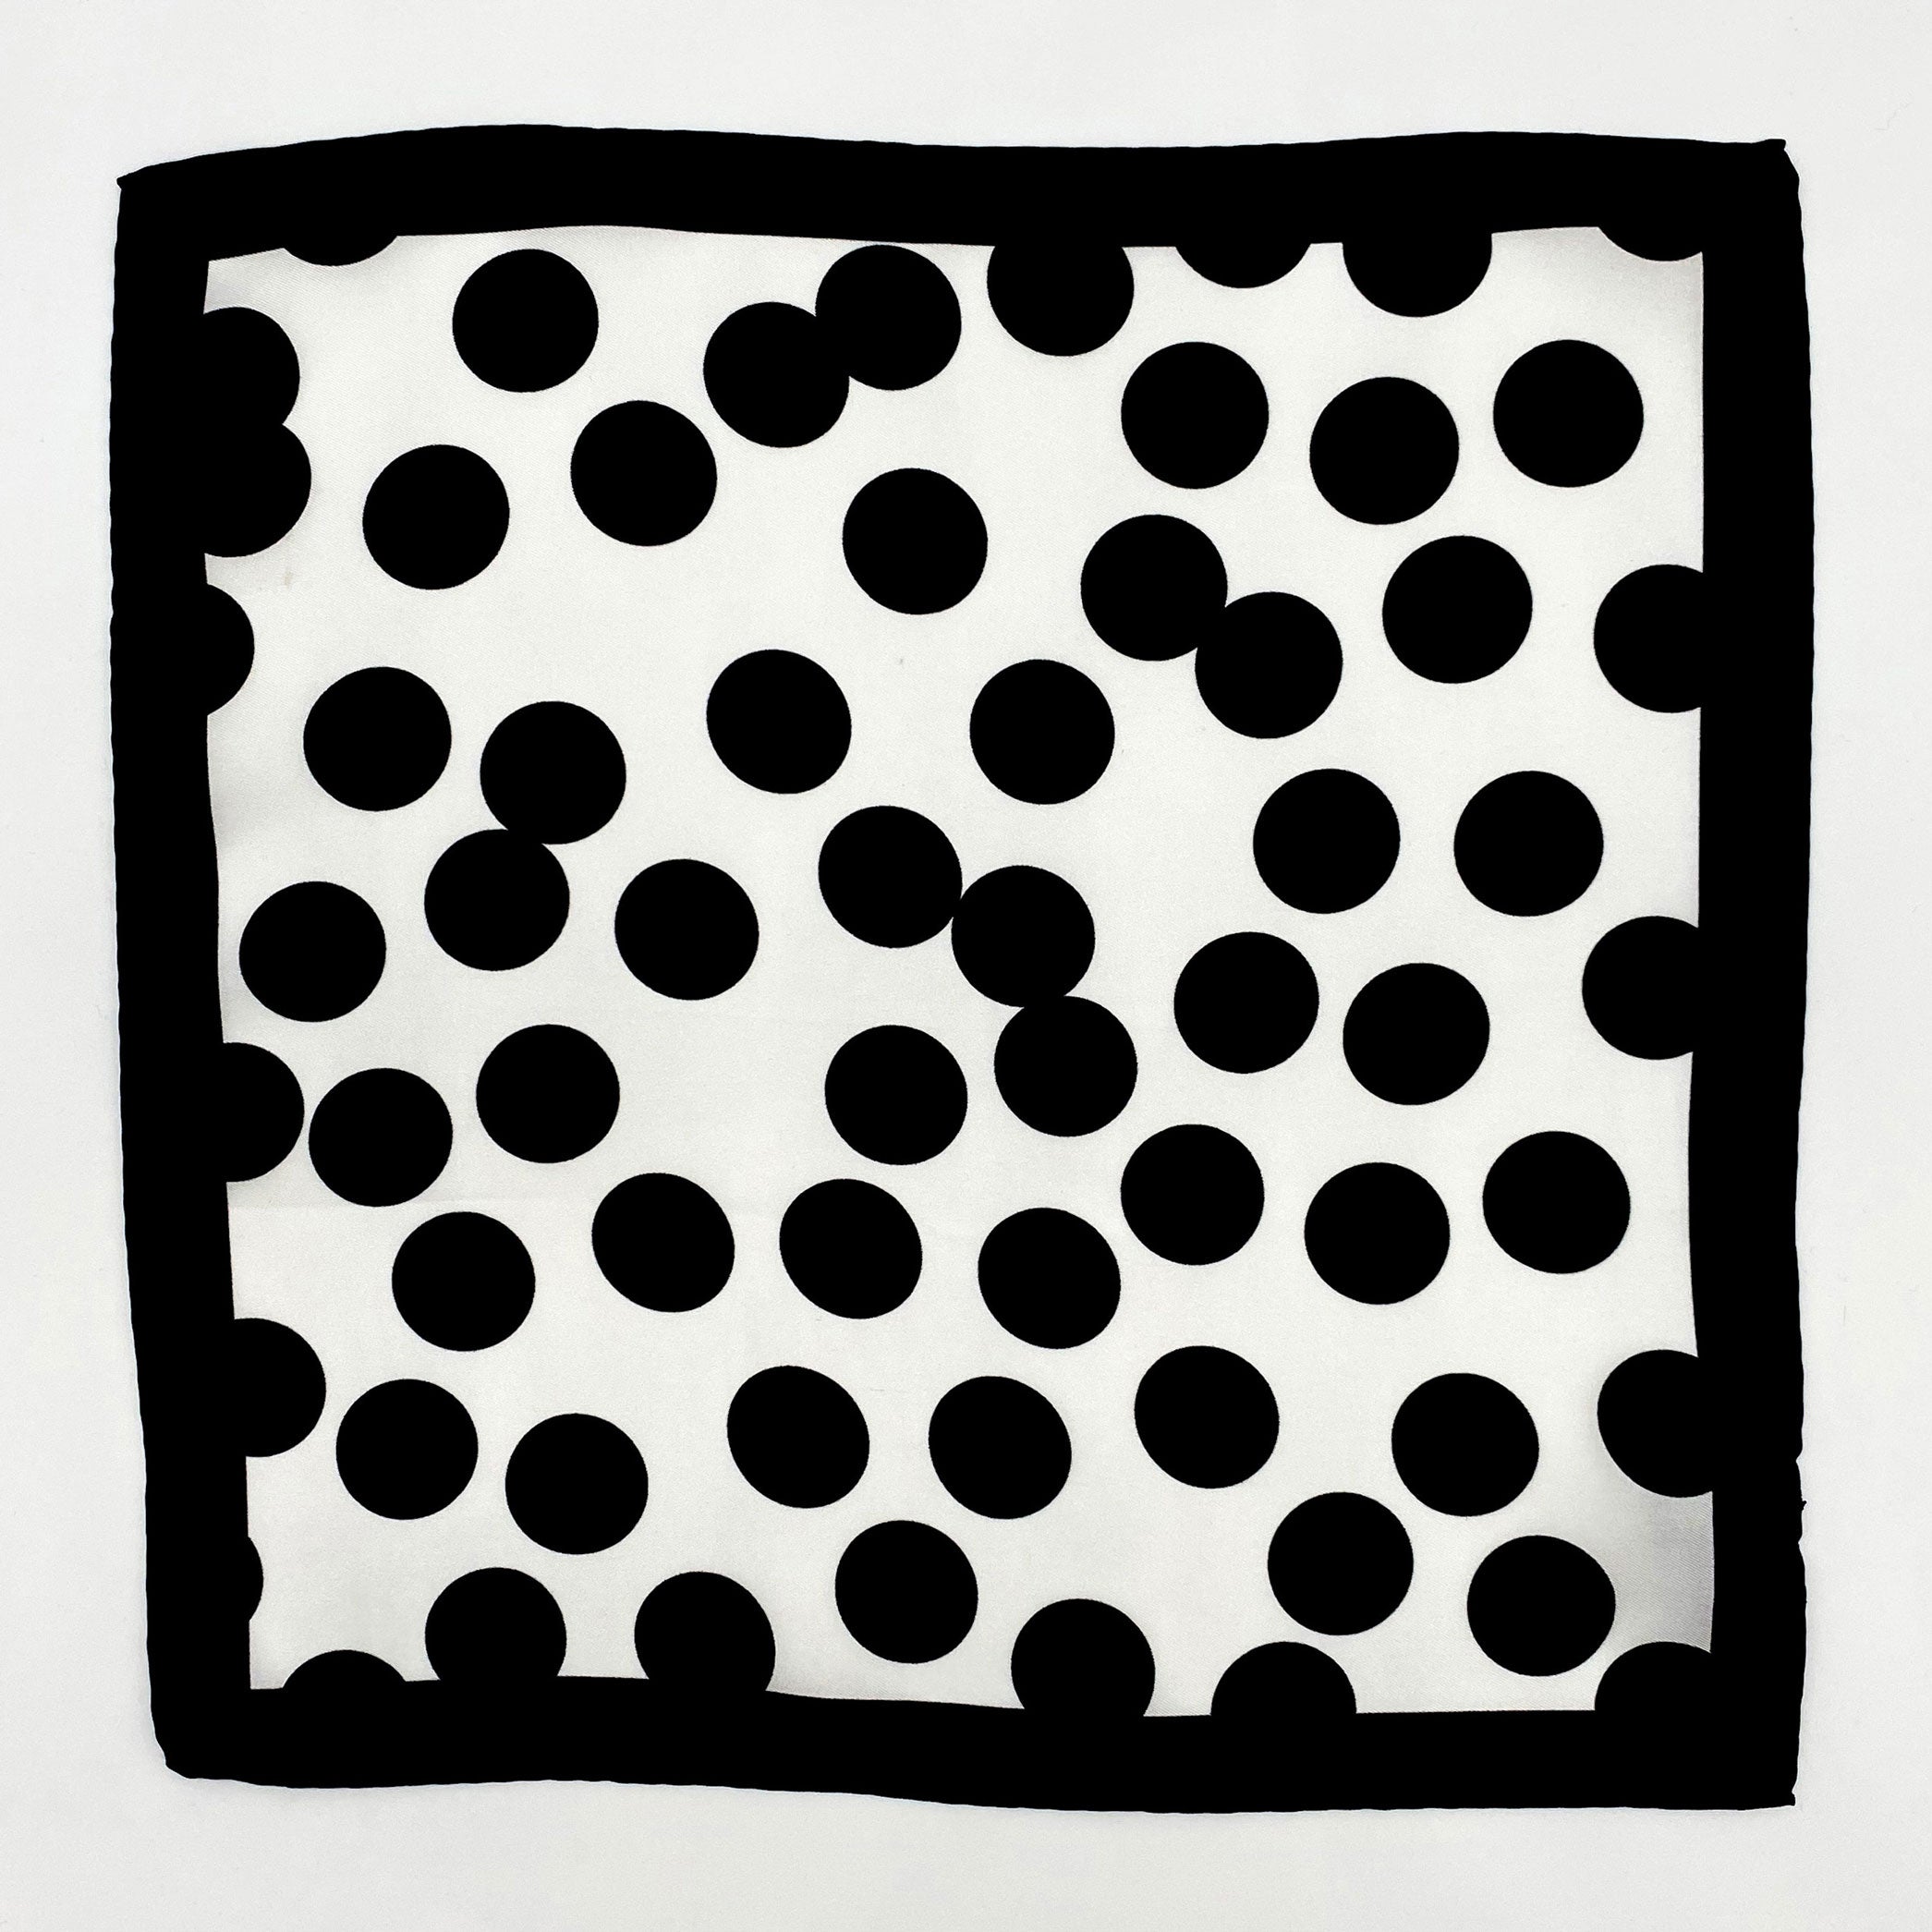 Completely unfolded monochrome silk pocket square showing the entirity of the polka-dot patterns and black border.